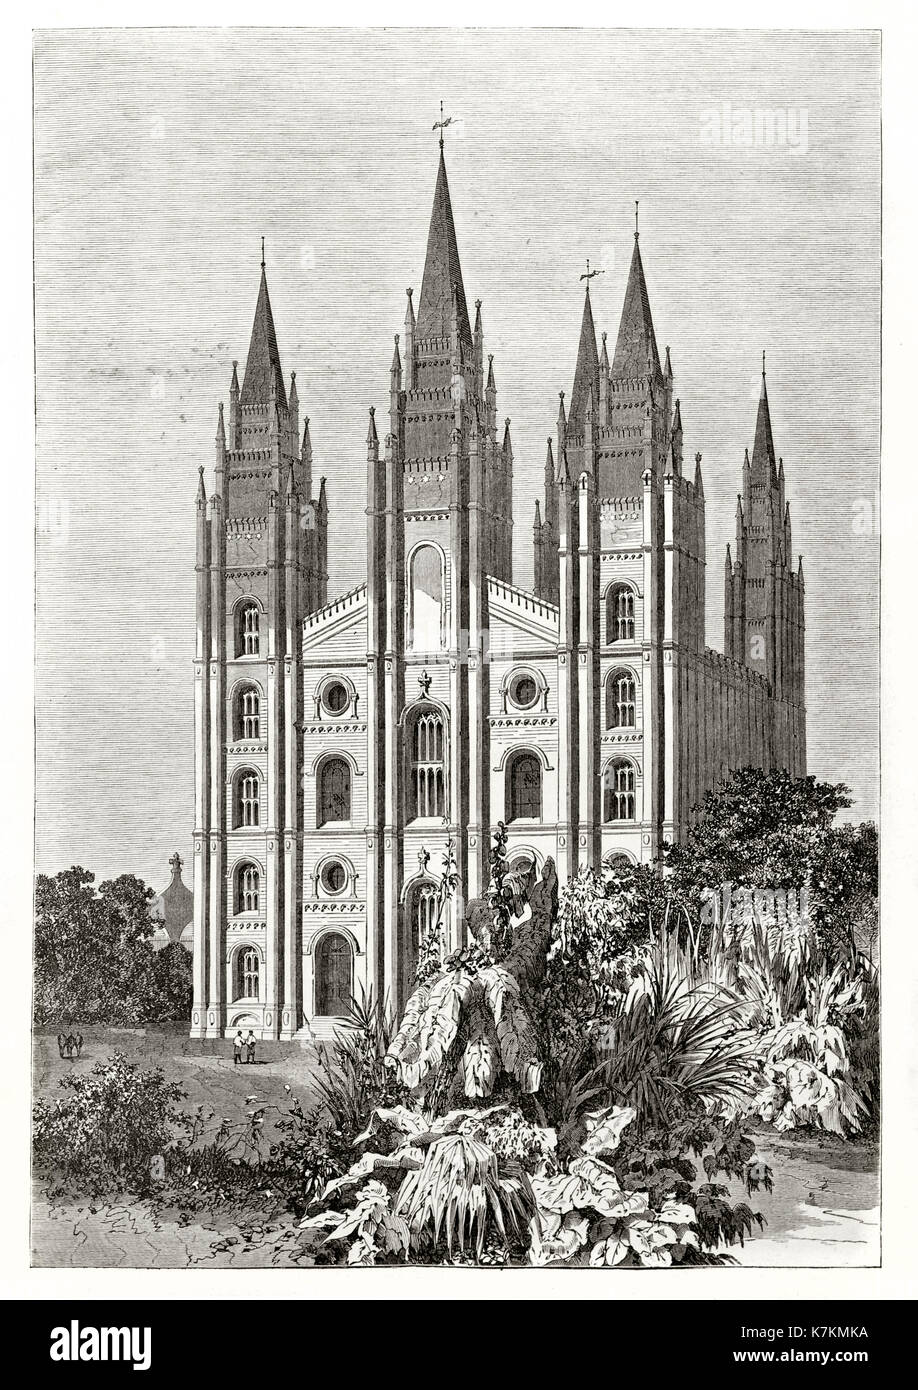 Old illustration depicting the facade of a projected Mormon temple. By Therond after Remy, publ. on Le Tour du Monde, Paris, 1862 Stock Photo